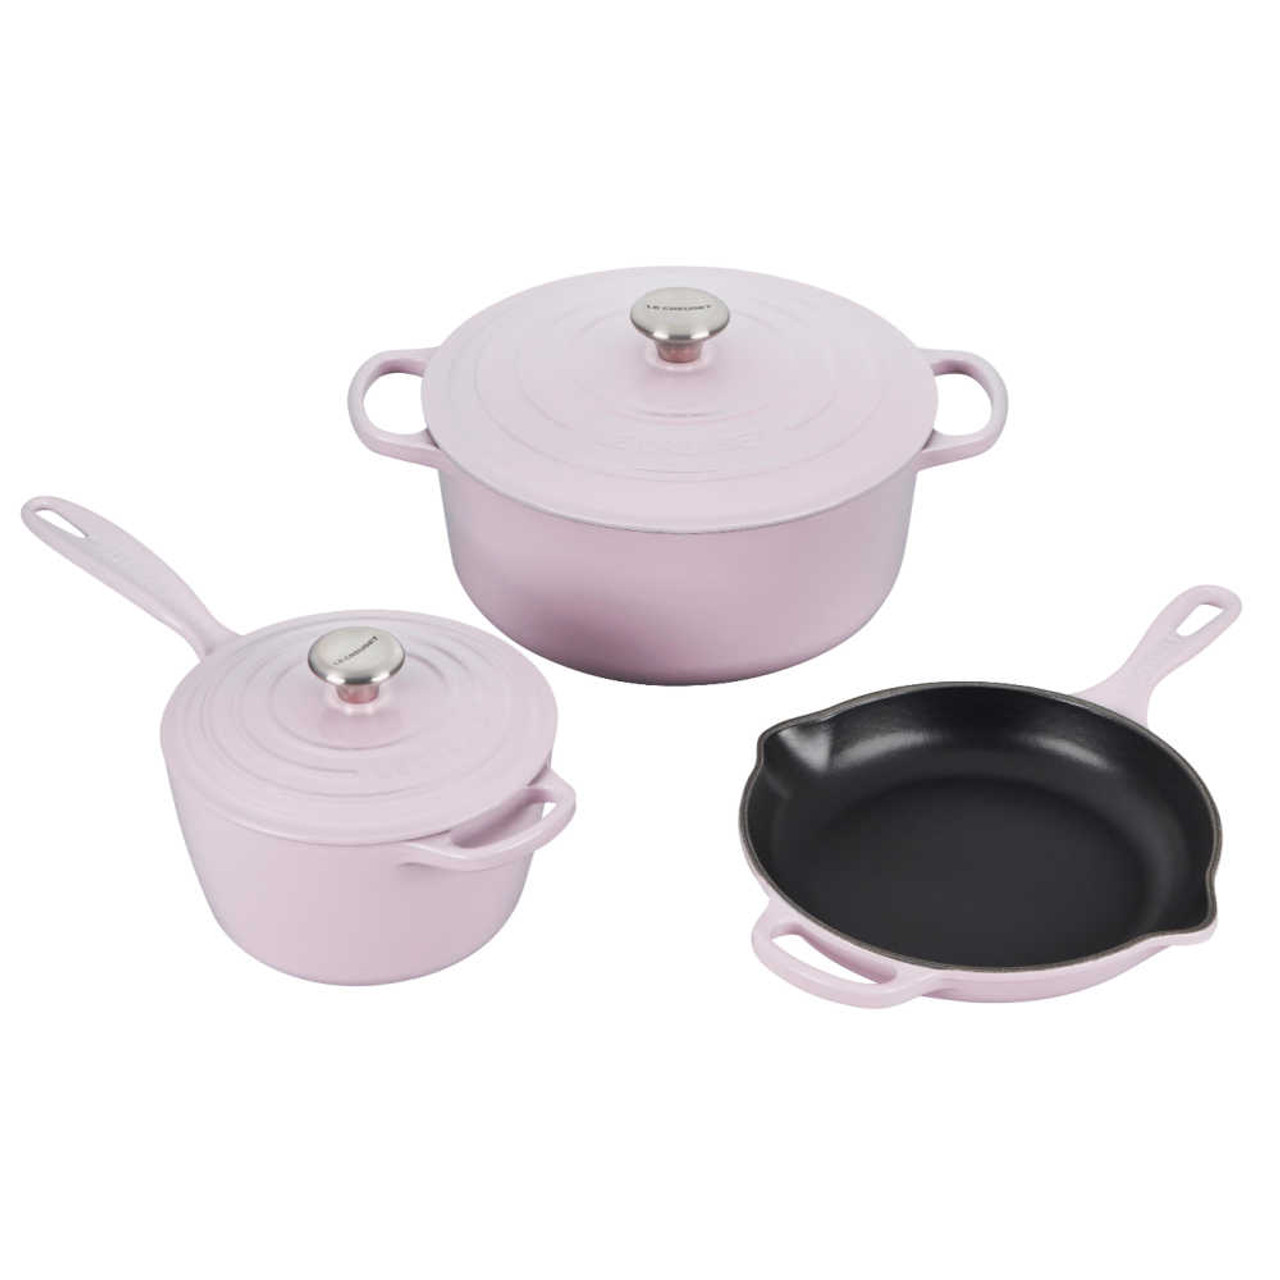 https://cdn11.bigcommerce.com/s-hccytny0od/images/stencil/1280x1280/products/5306/23026/Le_Creuset_5-Piece_Cookware_Set_Shallot__09346.1679429116.jpg?c=2?imbypass=on